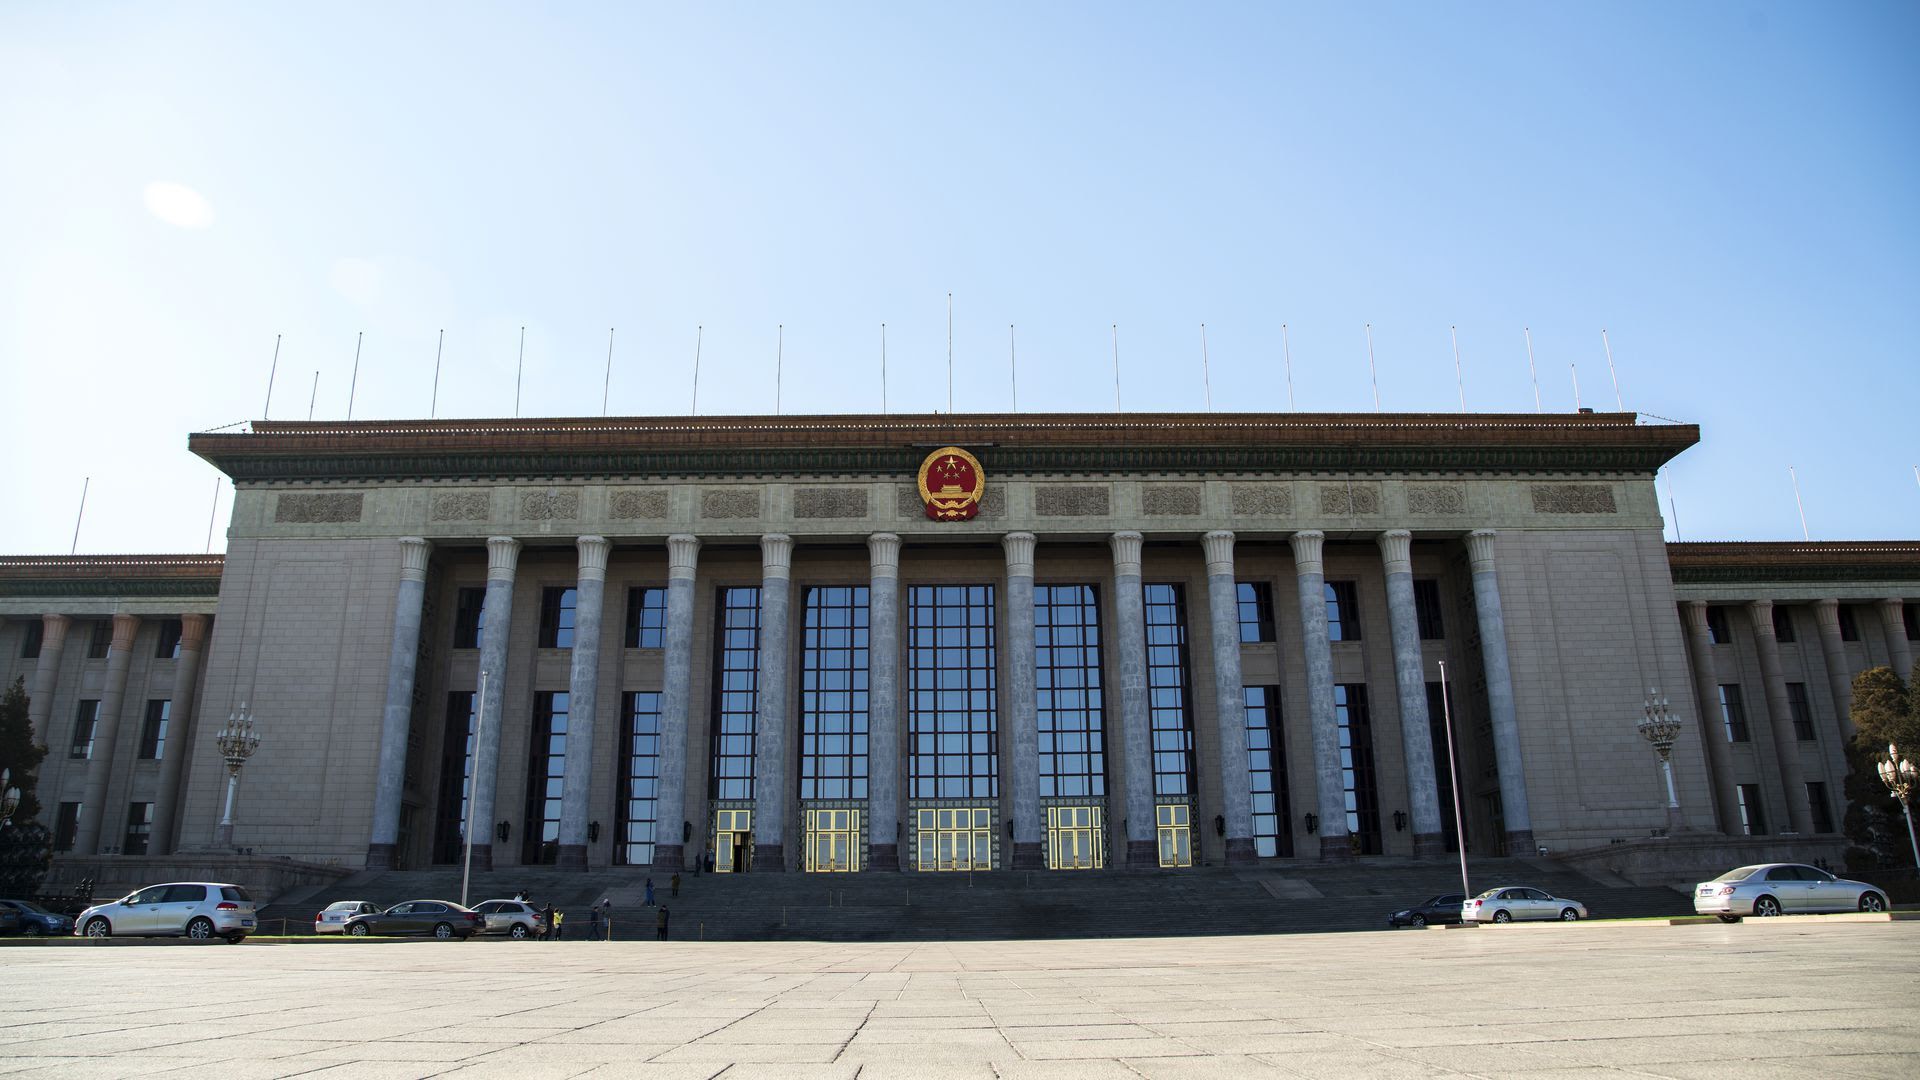 The Great Hall of the People, located on the west of Tiananmen Square, where the "Two Meetings" are held each year. Photo: Zhang Peng / LightRocket via Getty Images